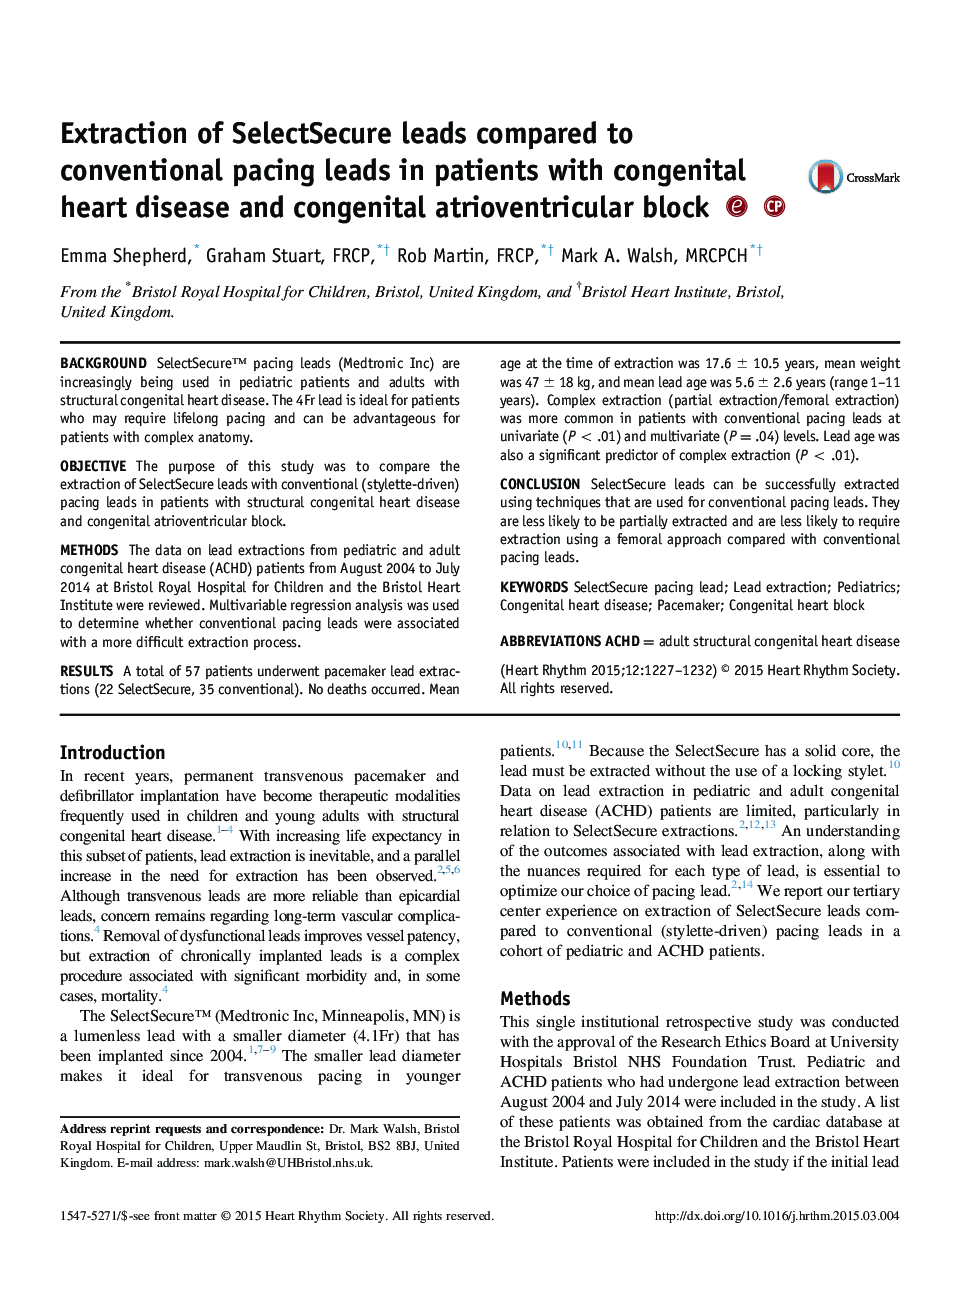 Extraction of SelectSecure leads compared to conventional pacing leads in patients with congenital heart disease and congenital atrioventricular block